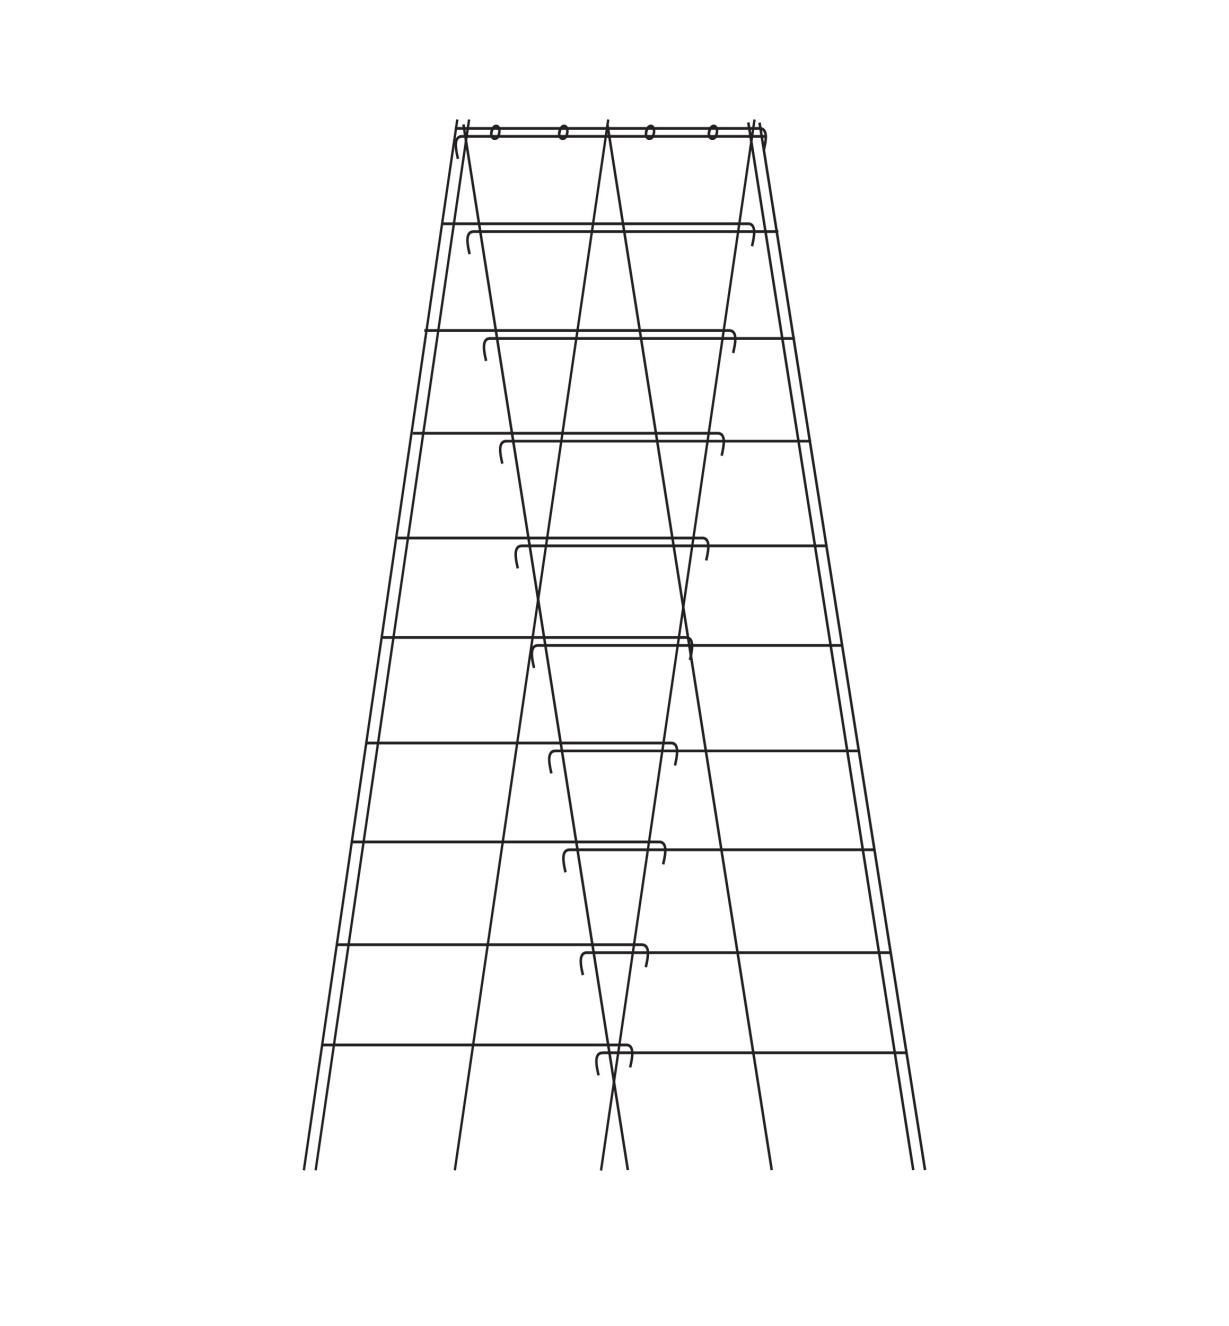 Trellis Panels linked to form and A-frame